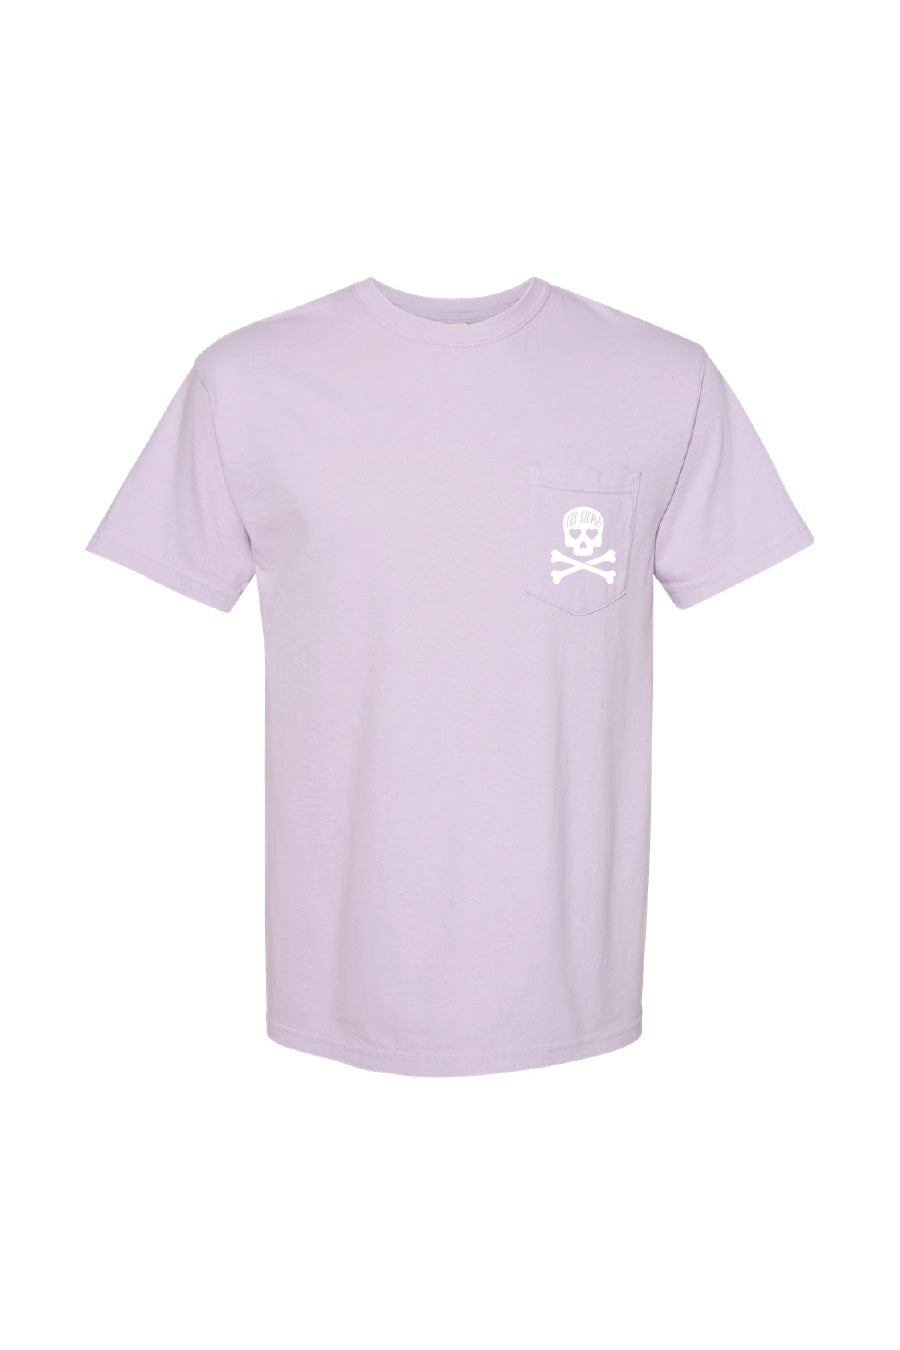 Load image into Gallery viewer, Skull Pocket Tee
